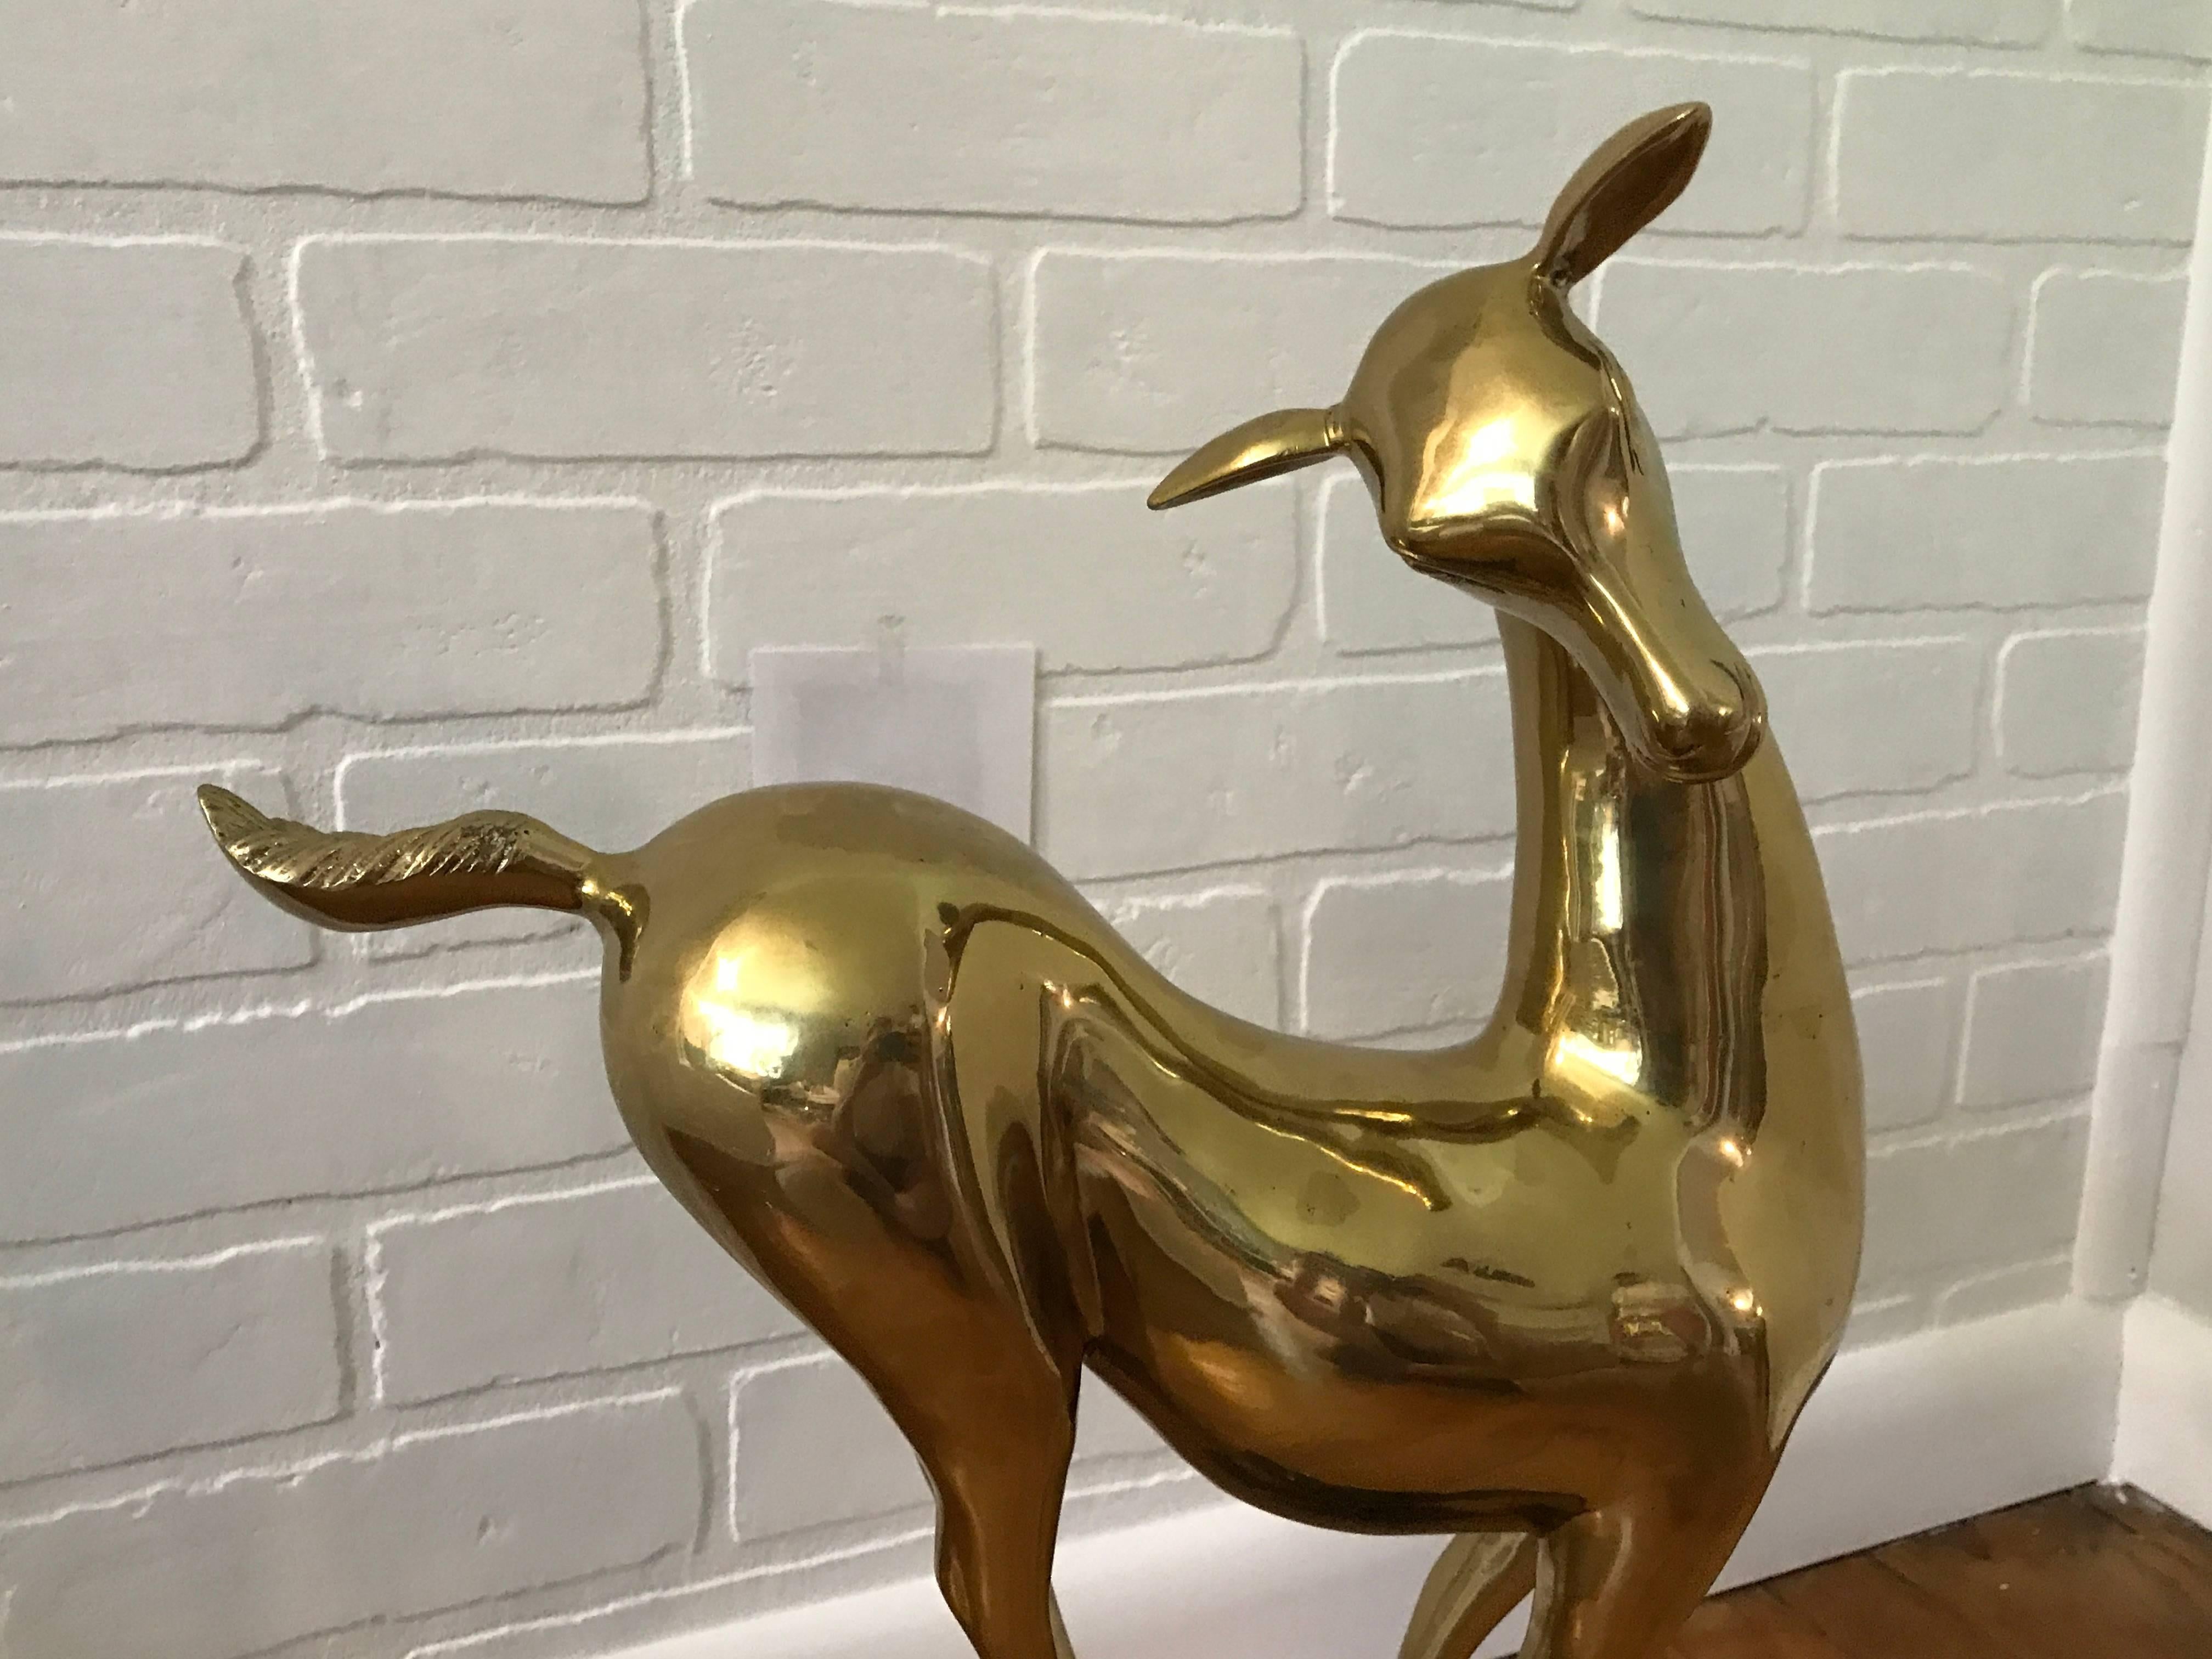 Offered is a stunning, 1960s modern Italian brass deer sculpture mounted on a lacquered base. Heavy.